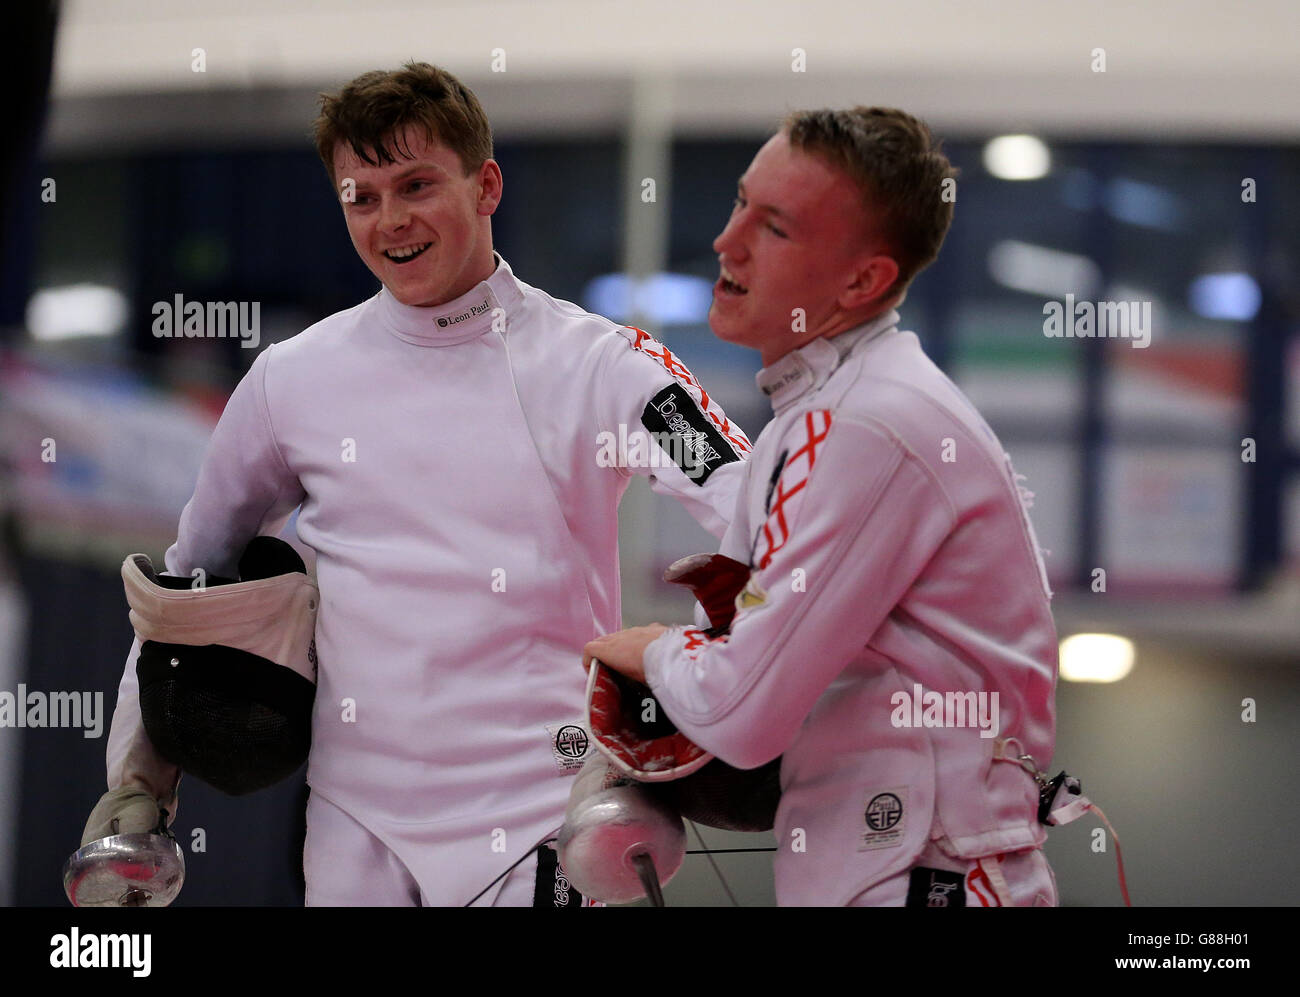 England's Oliver Steed (left) after beating fellow compatriot Owen Jordan in the Men's Epee Final at the Fencing during the Sainsbury's 2015 School Games in Manchester. PRESS ASSOCIATION Photo. Picture date: Saturday September 5, 2015. Photo credit should read: Steven Paston/PA Wire Stock Photo